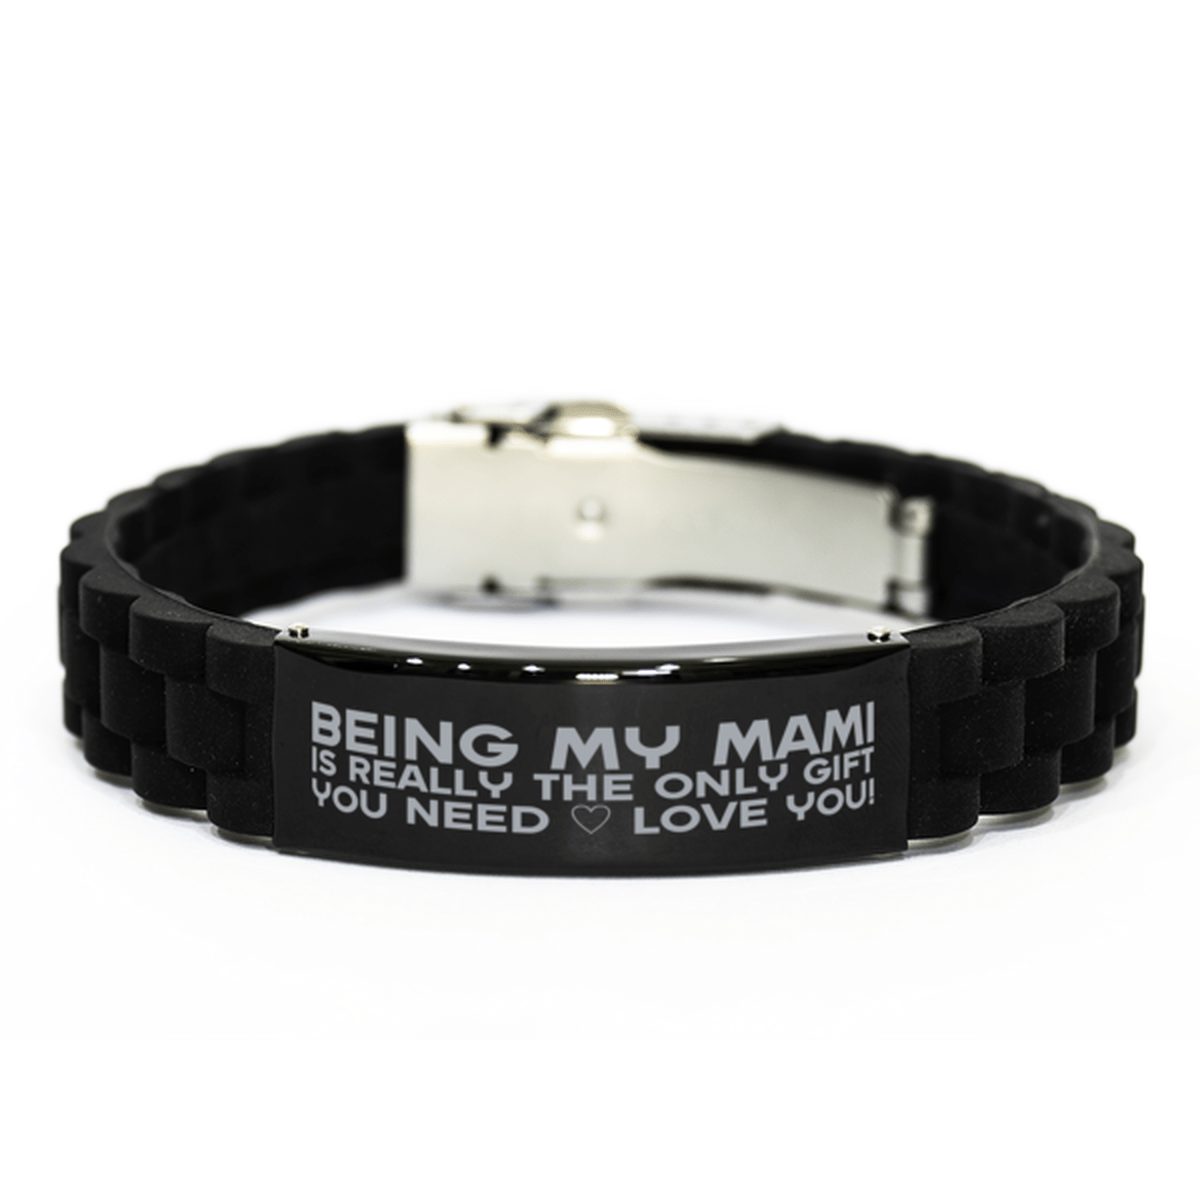 Funny Mami Bracelet, Being My Mami Is Really the Only Gift You Need, Best Birthday Gifts for Mami